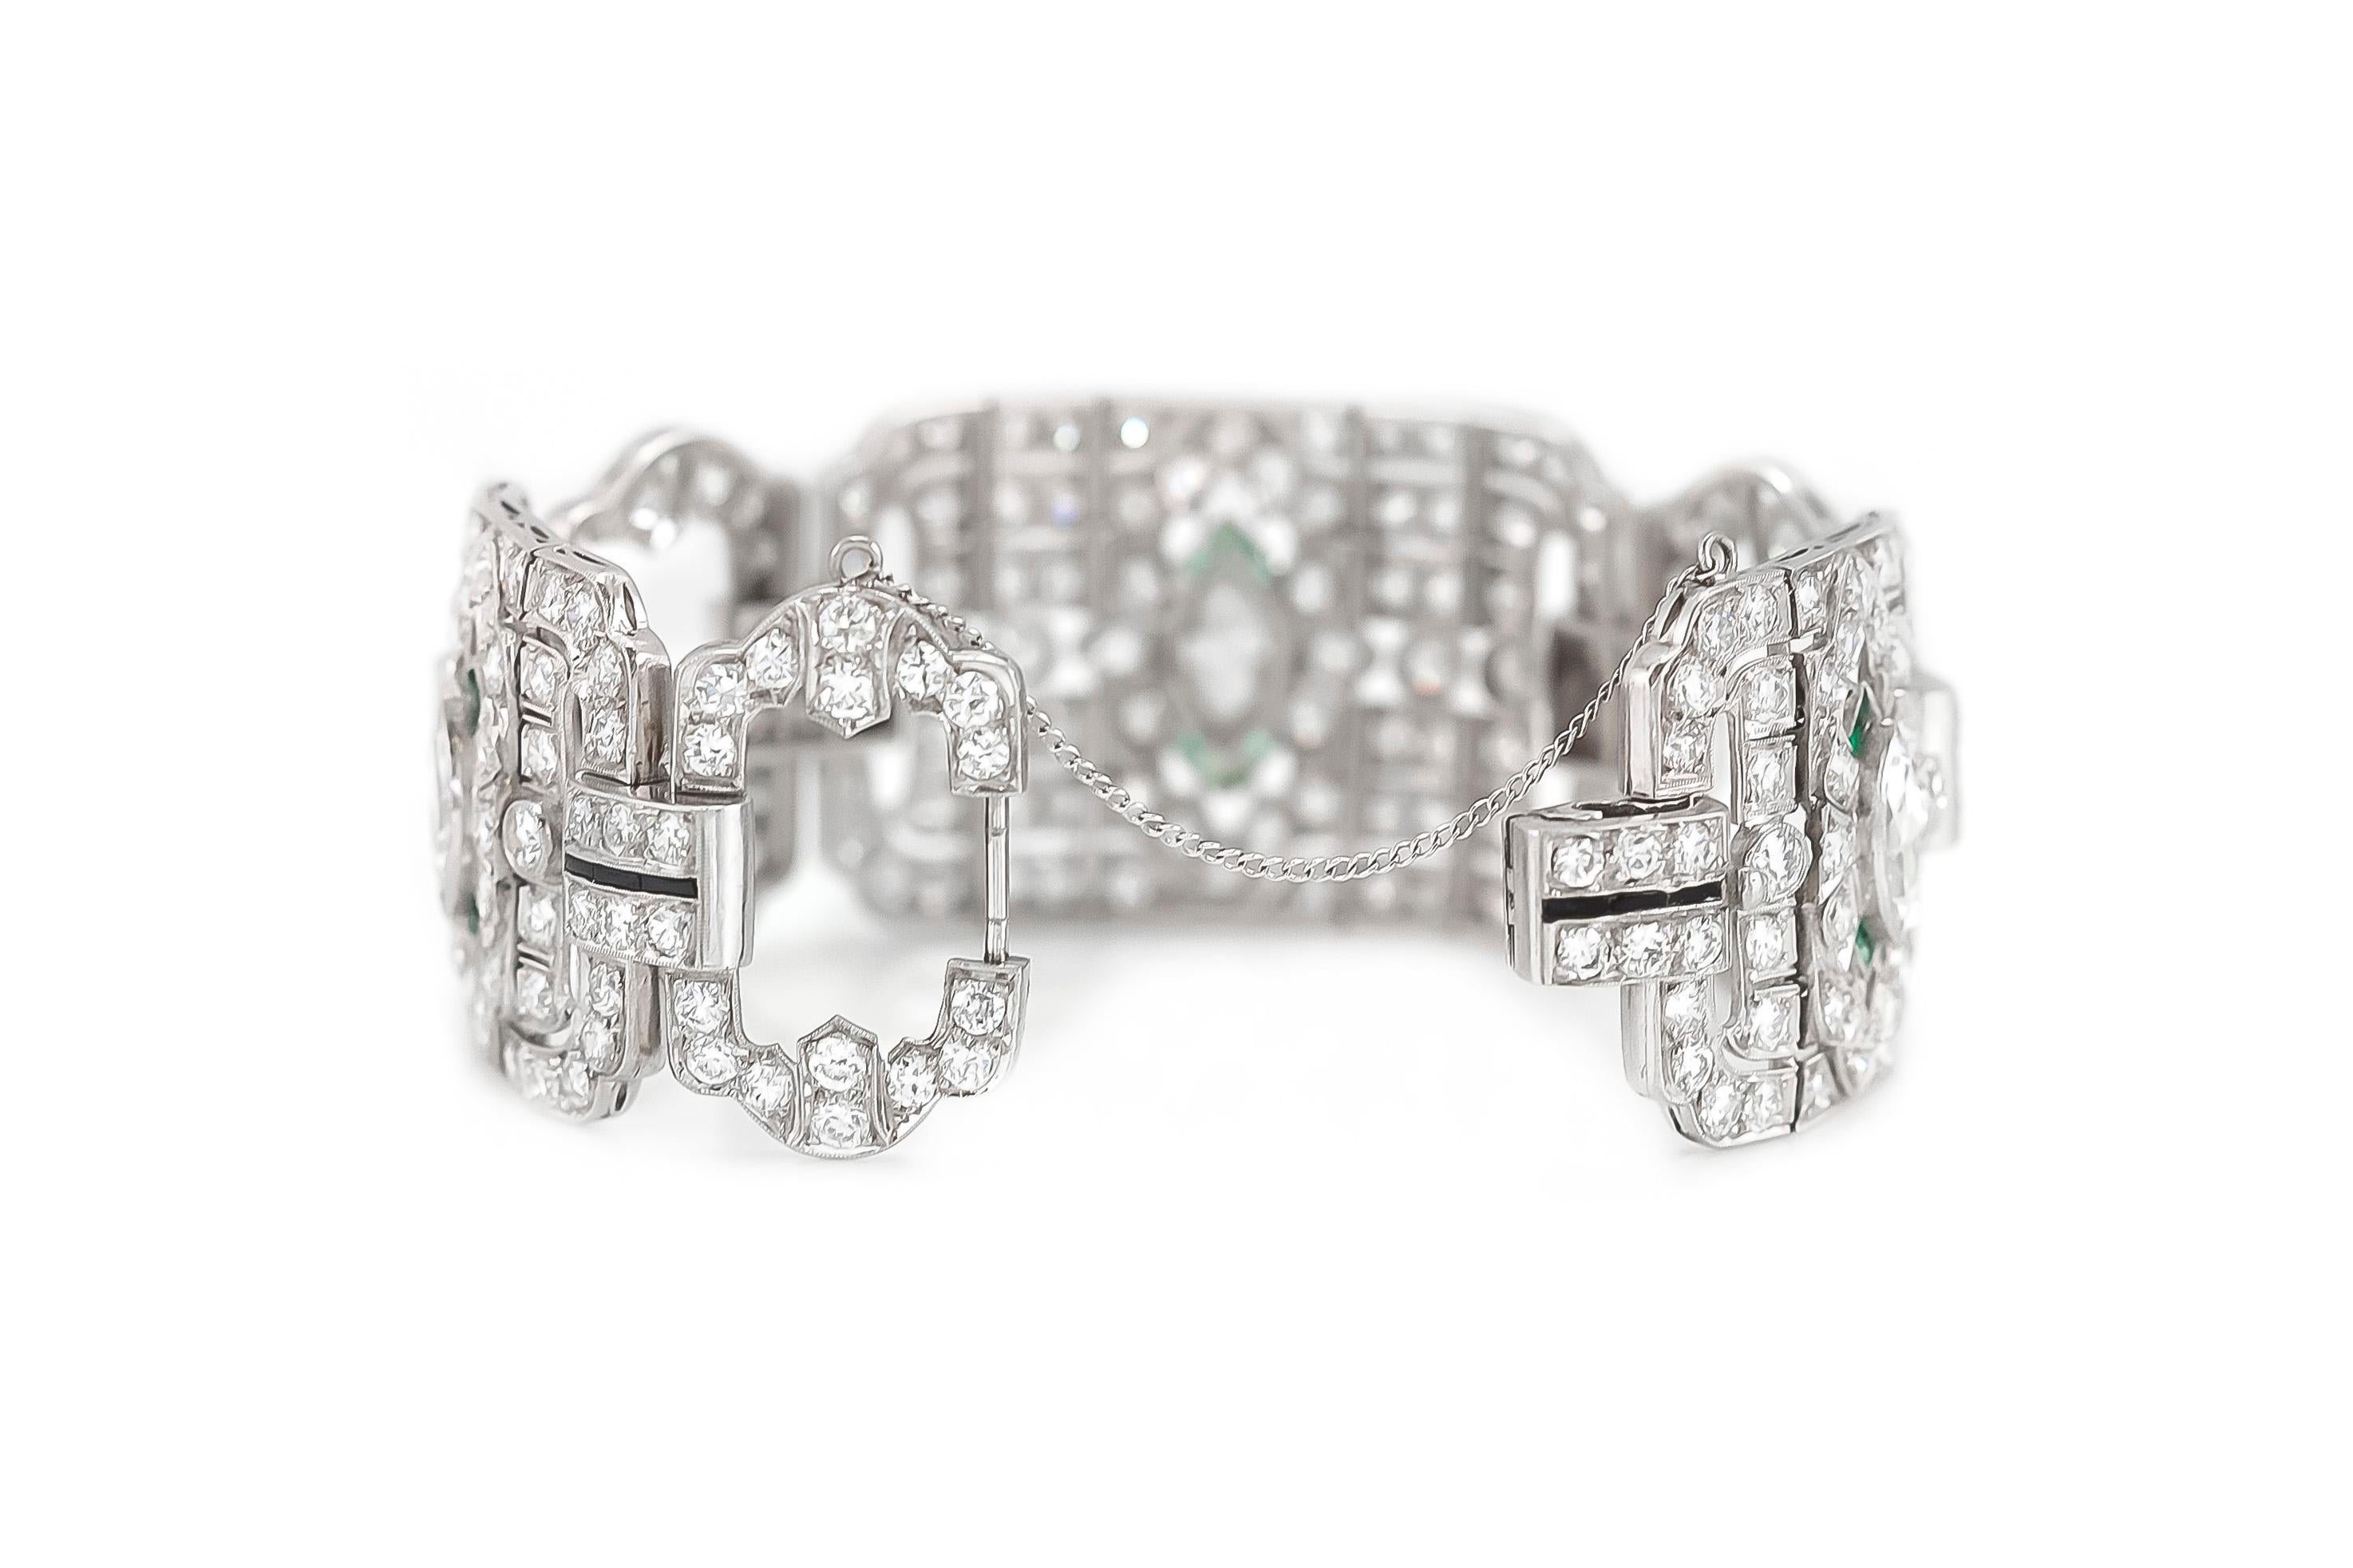 The art deco bracelet is finely crafted in platinum with round diamonds weighing approximately total of 20.00 carat and marquise diamonds weighing approximately total of 2.00.
On the side there are also emeralds and onyx.
Circa 1930's.